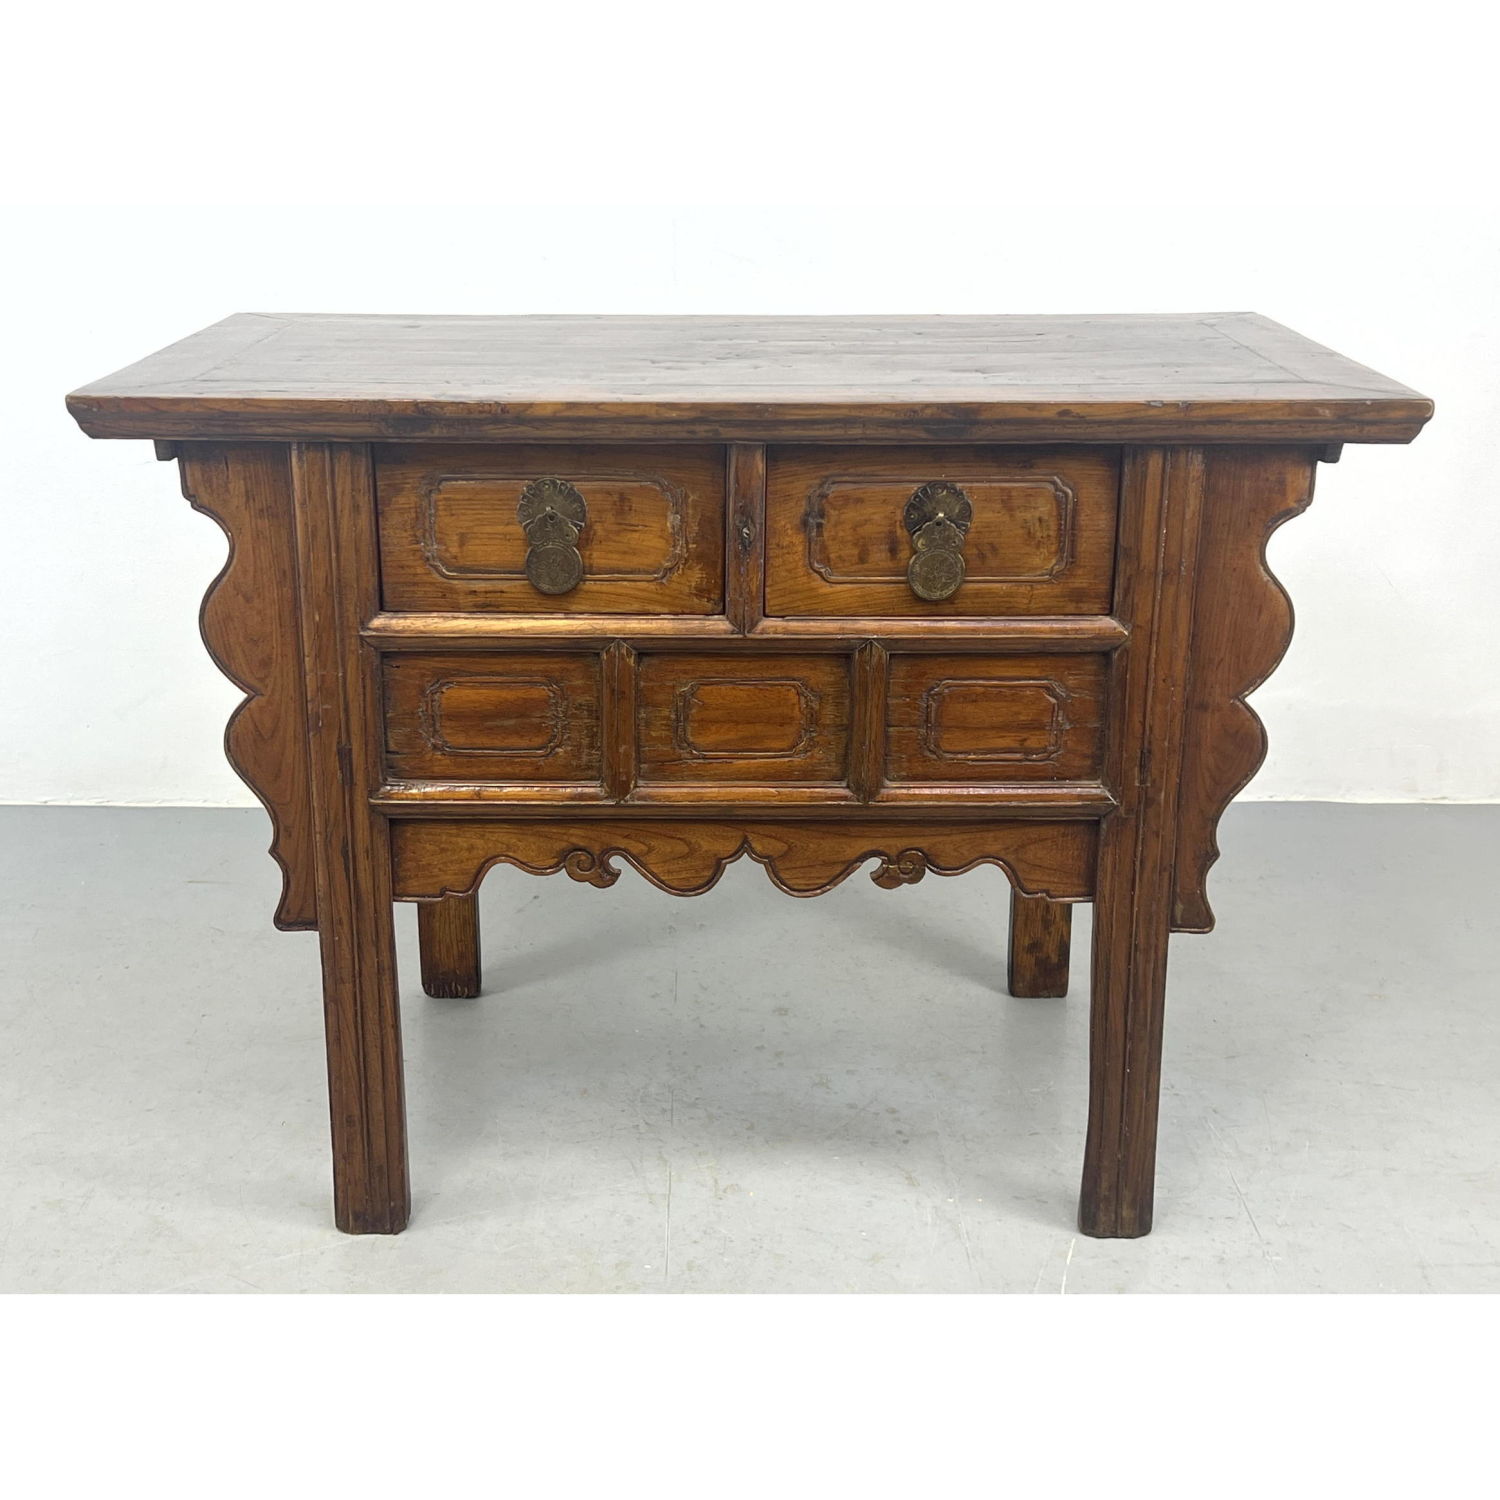 Asian Wood Table with Carved Skirt 2fed4b